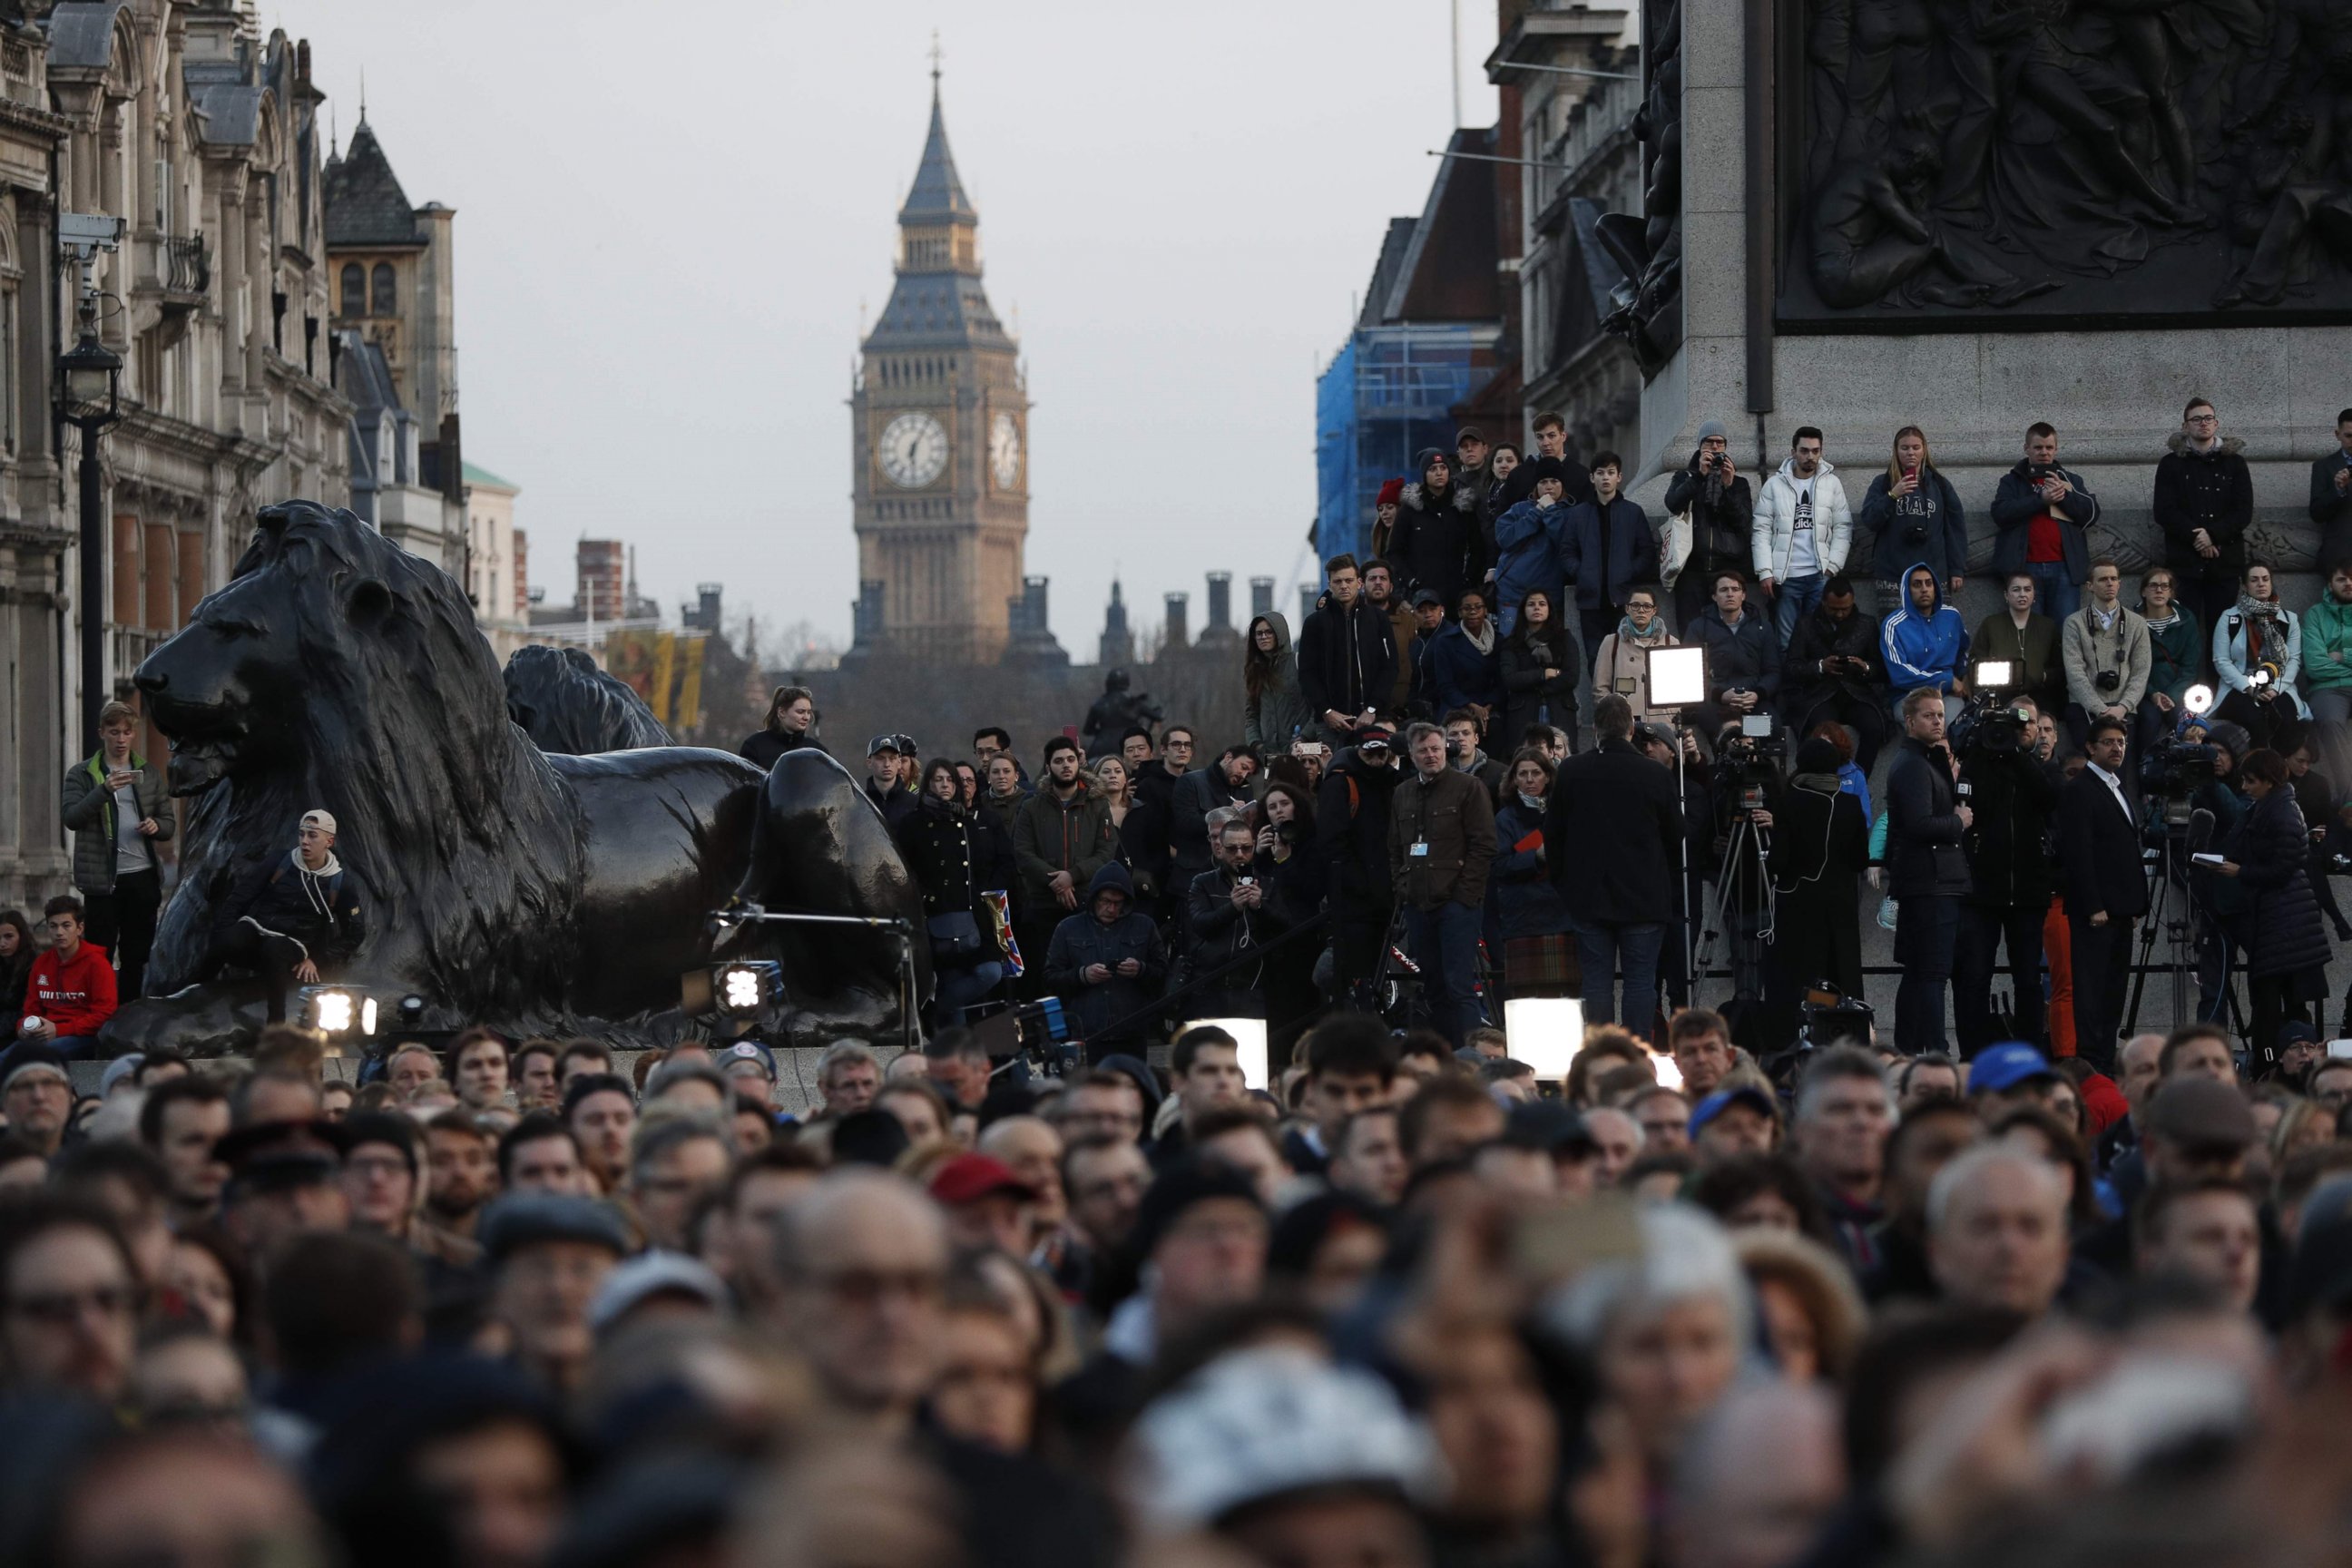 PHOTO: People gather for a vigil in Trafalgar Square in central London, on March 23, 2017, in solidarity with the victims of the March 22 terror attack at the British parliament and on Westminster Bridge. 